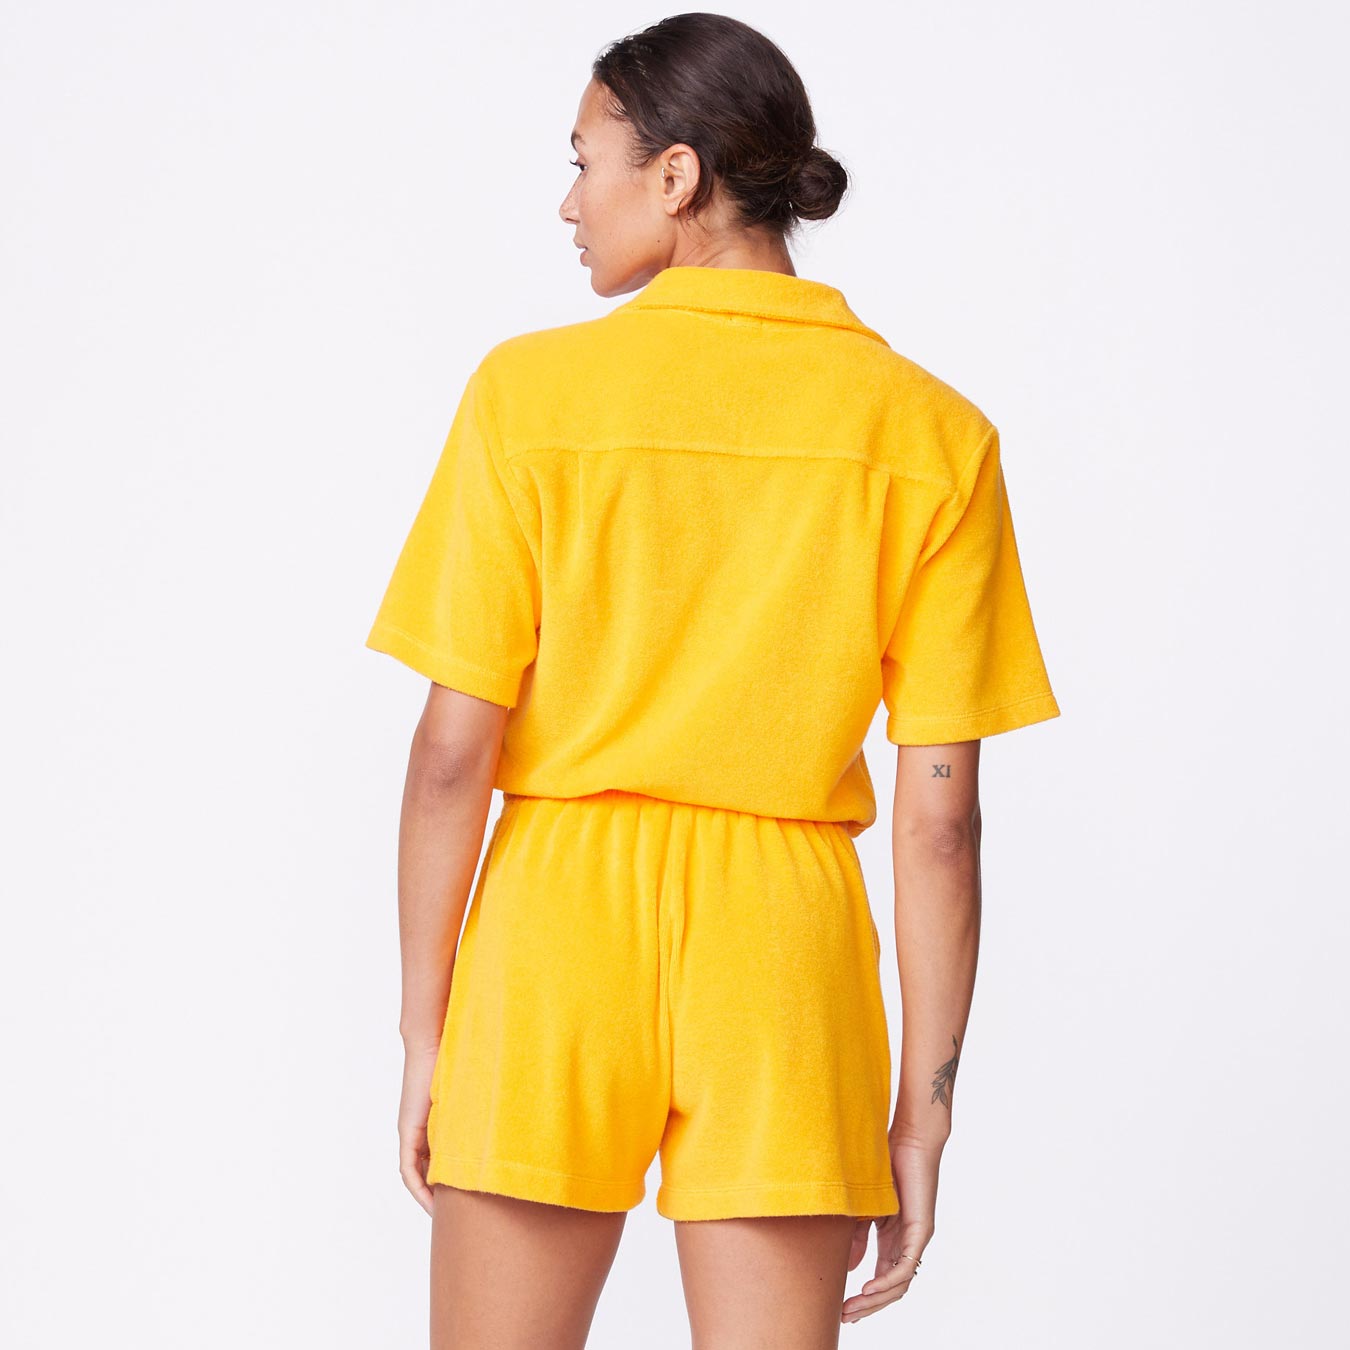 Back view of model wearing the terry cloth romper in marigold.